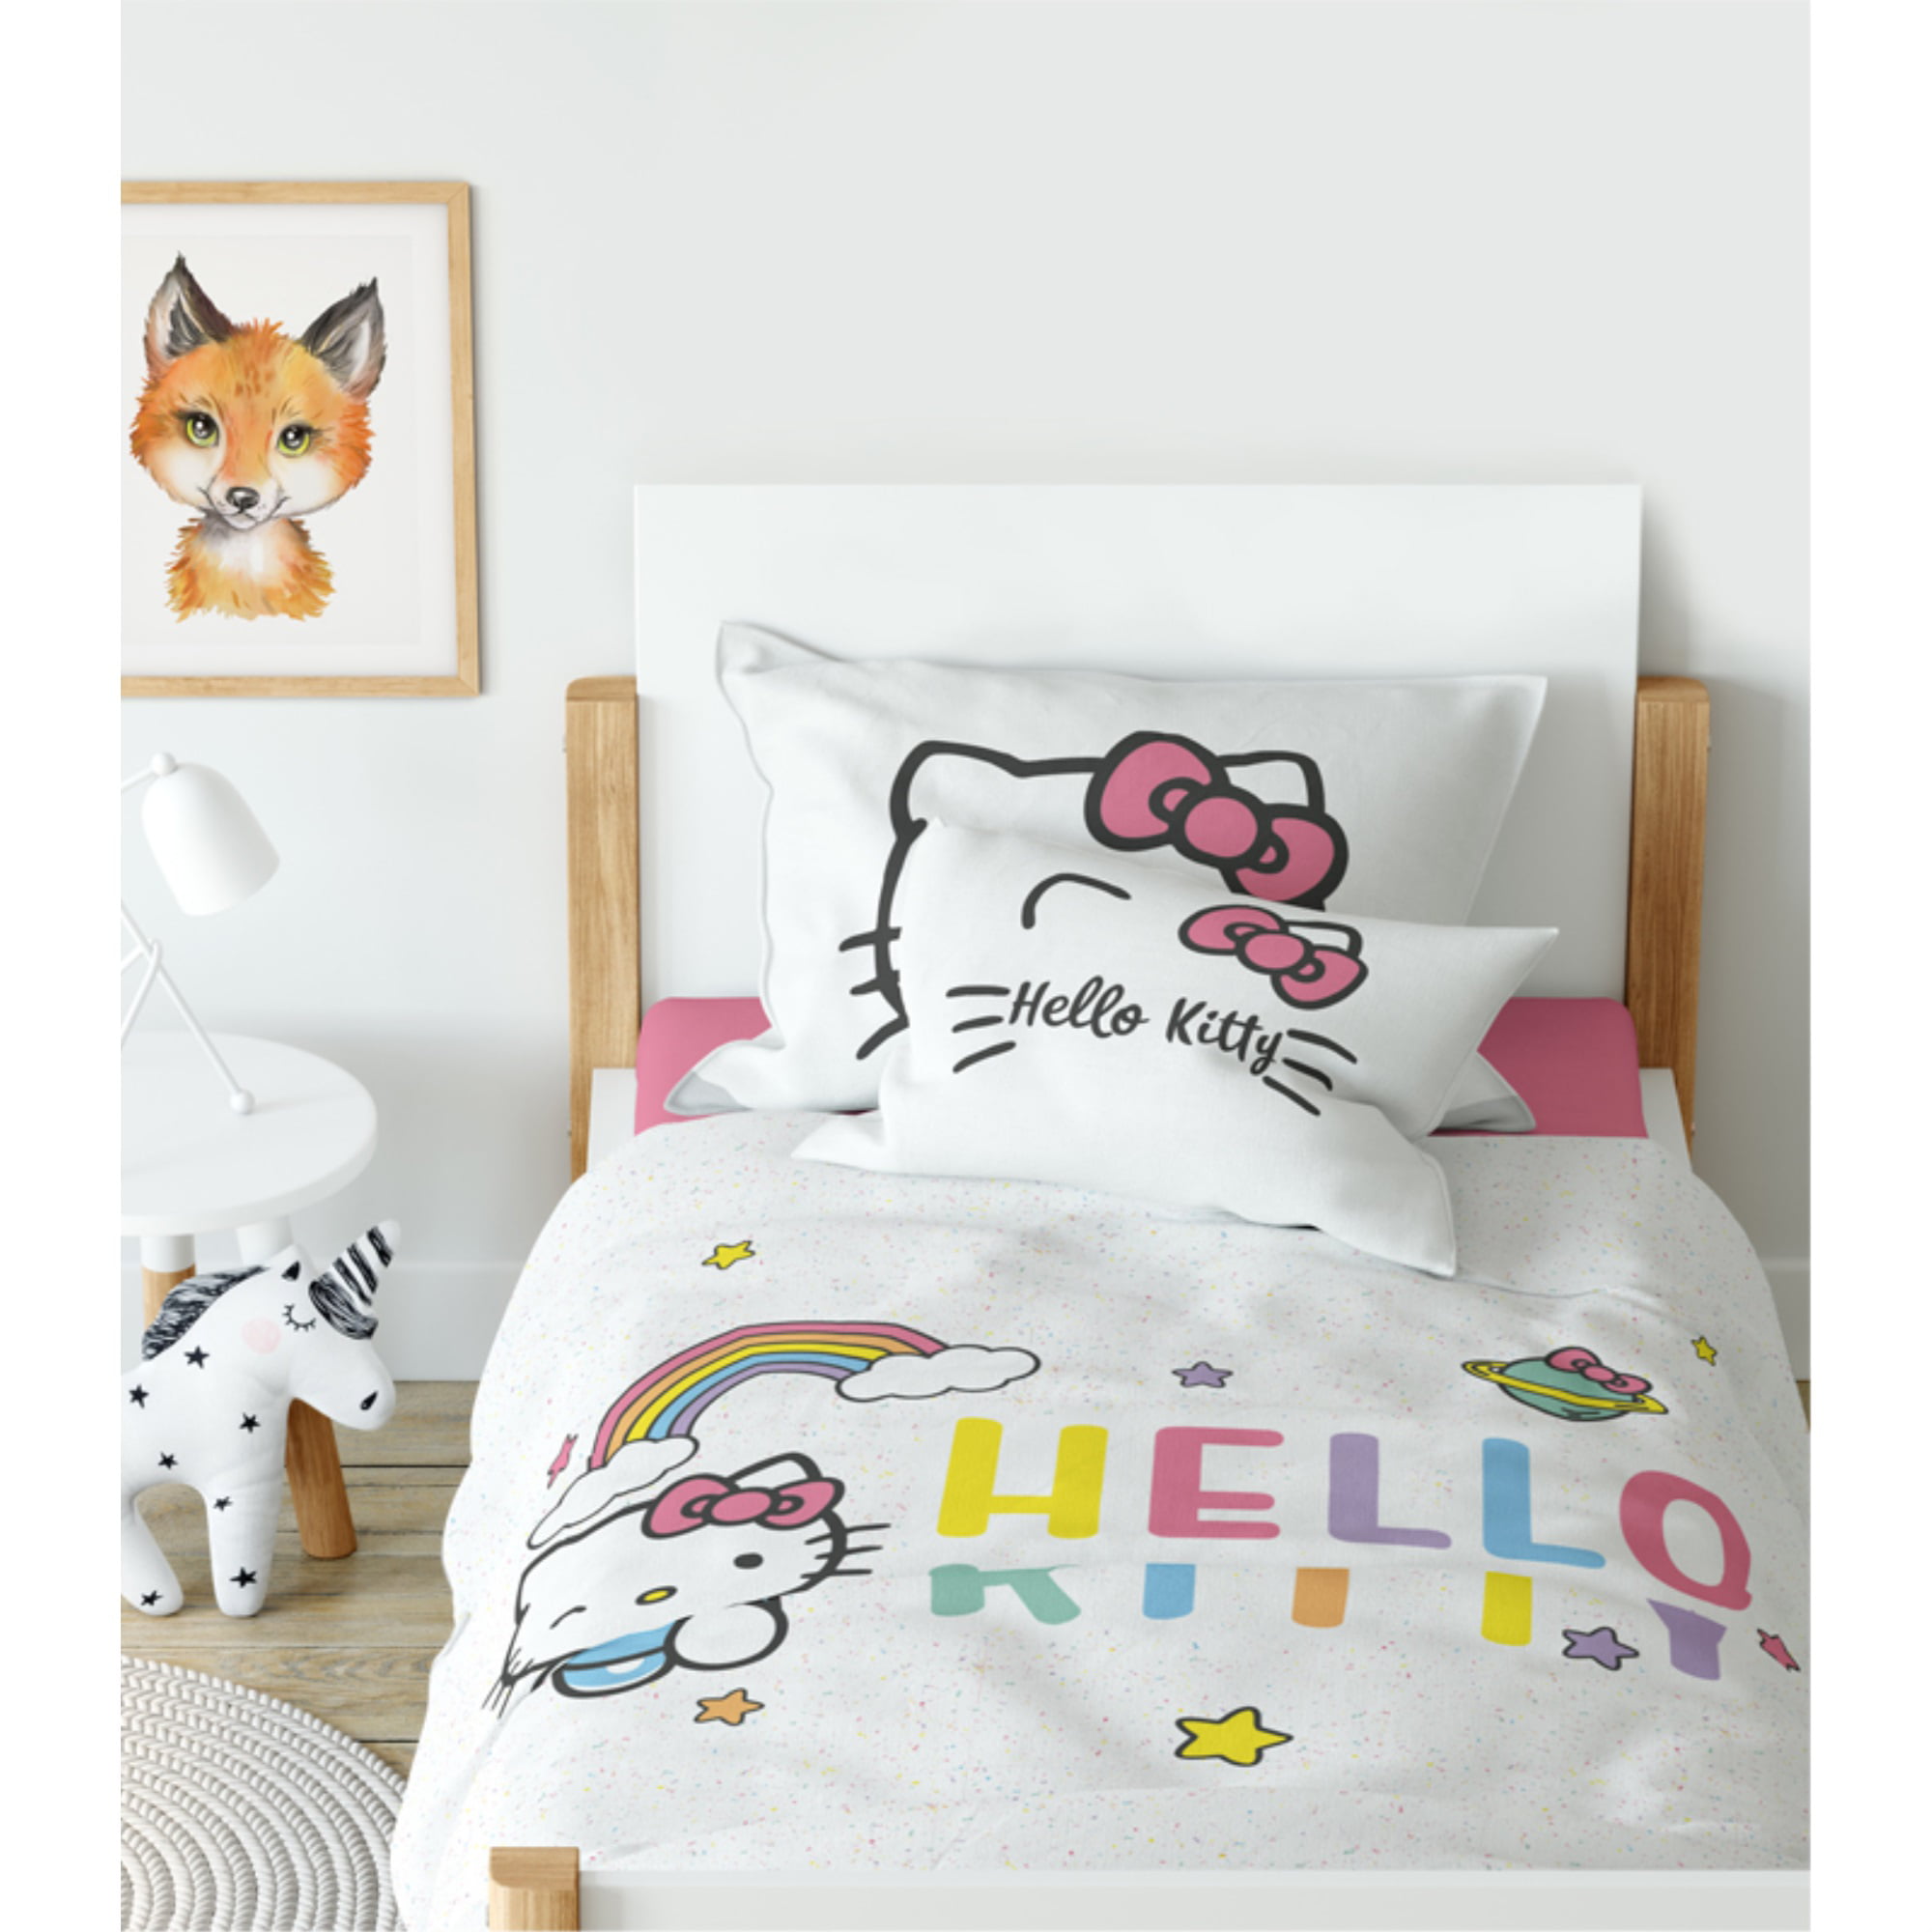 Hello Kitty Ink Single Duvet & Matching Curtains Bedding Set New Gift 